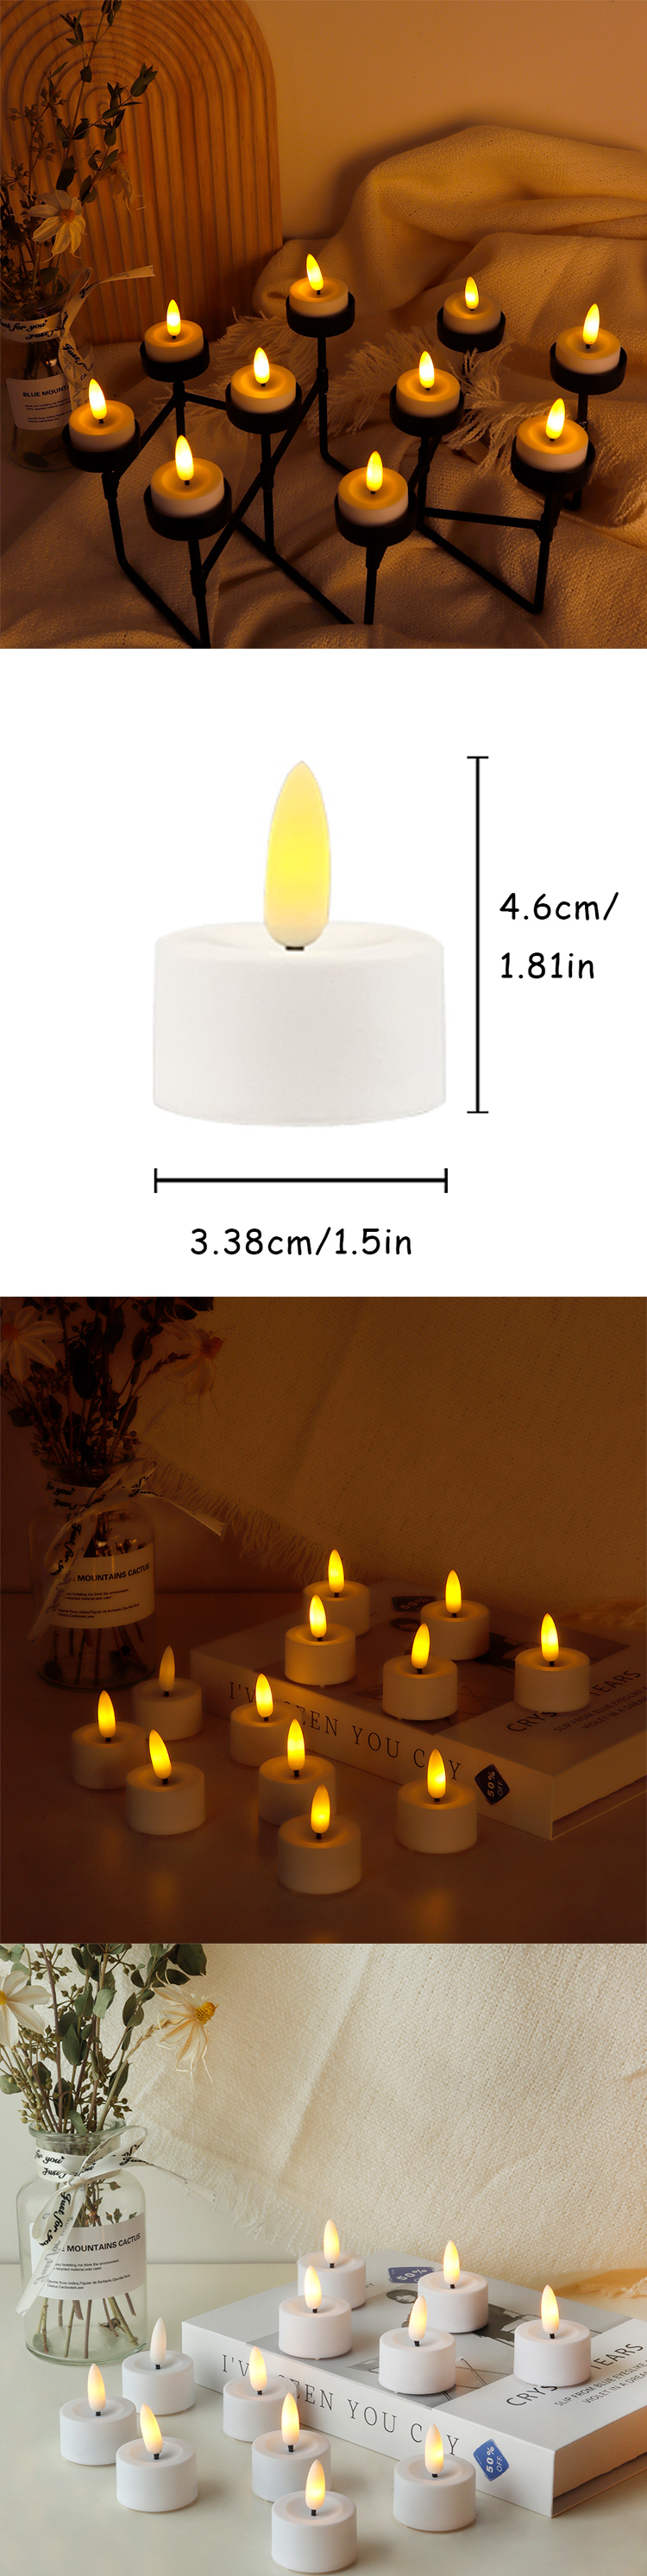 JHY Design 3D Real Flame White Plastic Led Candle Electric Flash Flame Small Candle Yellow Flash Tea Light for Birthday 